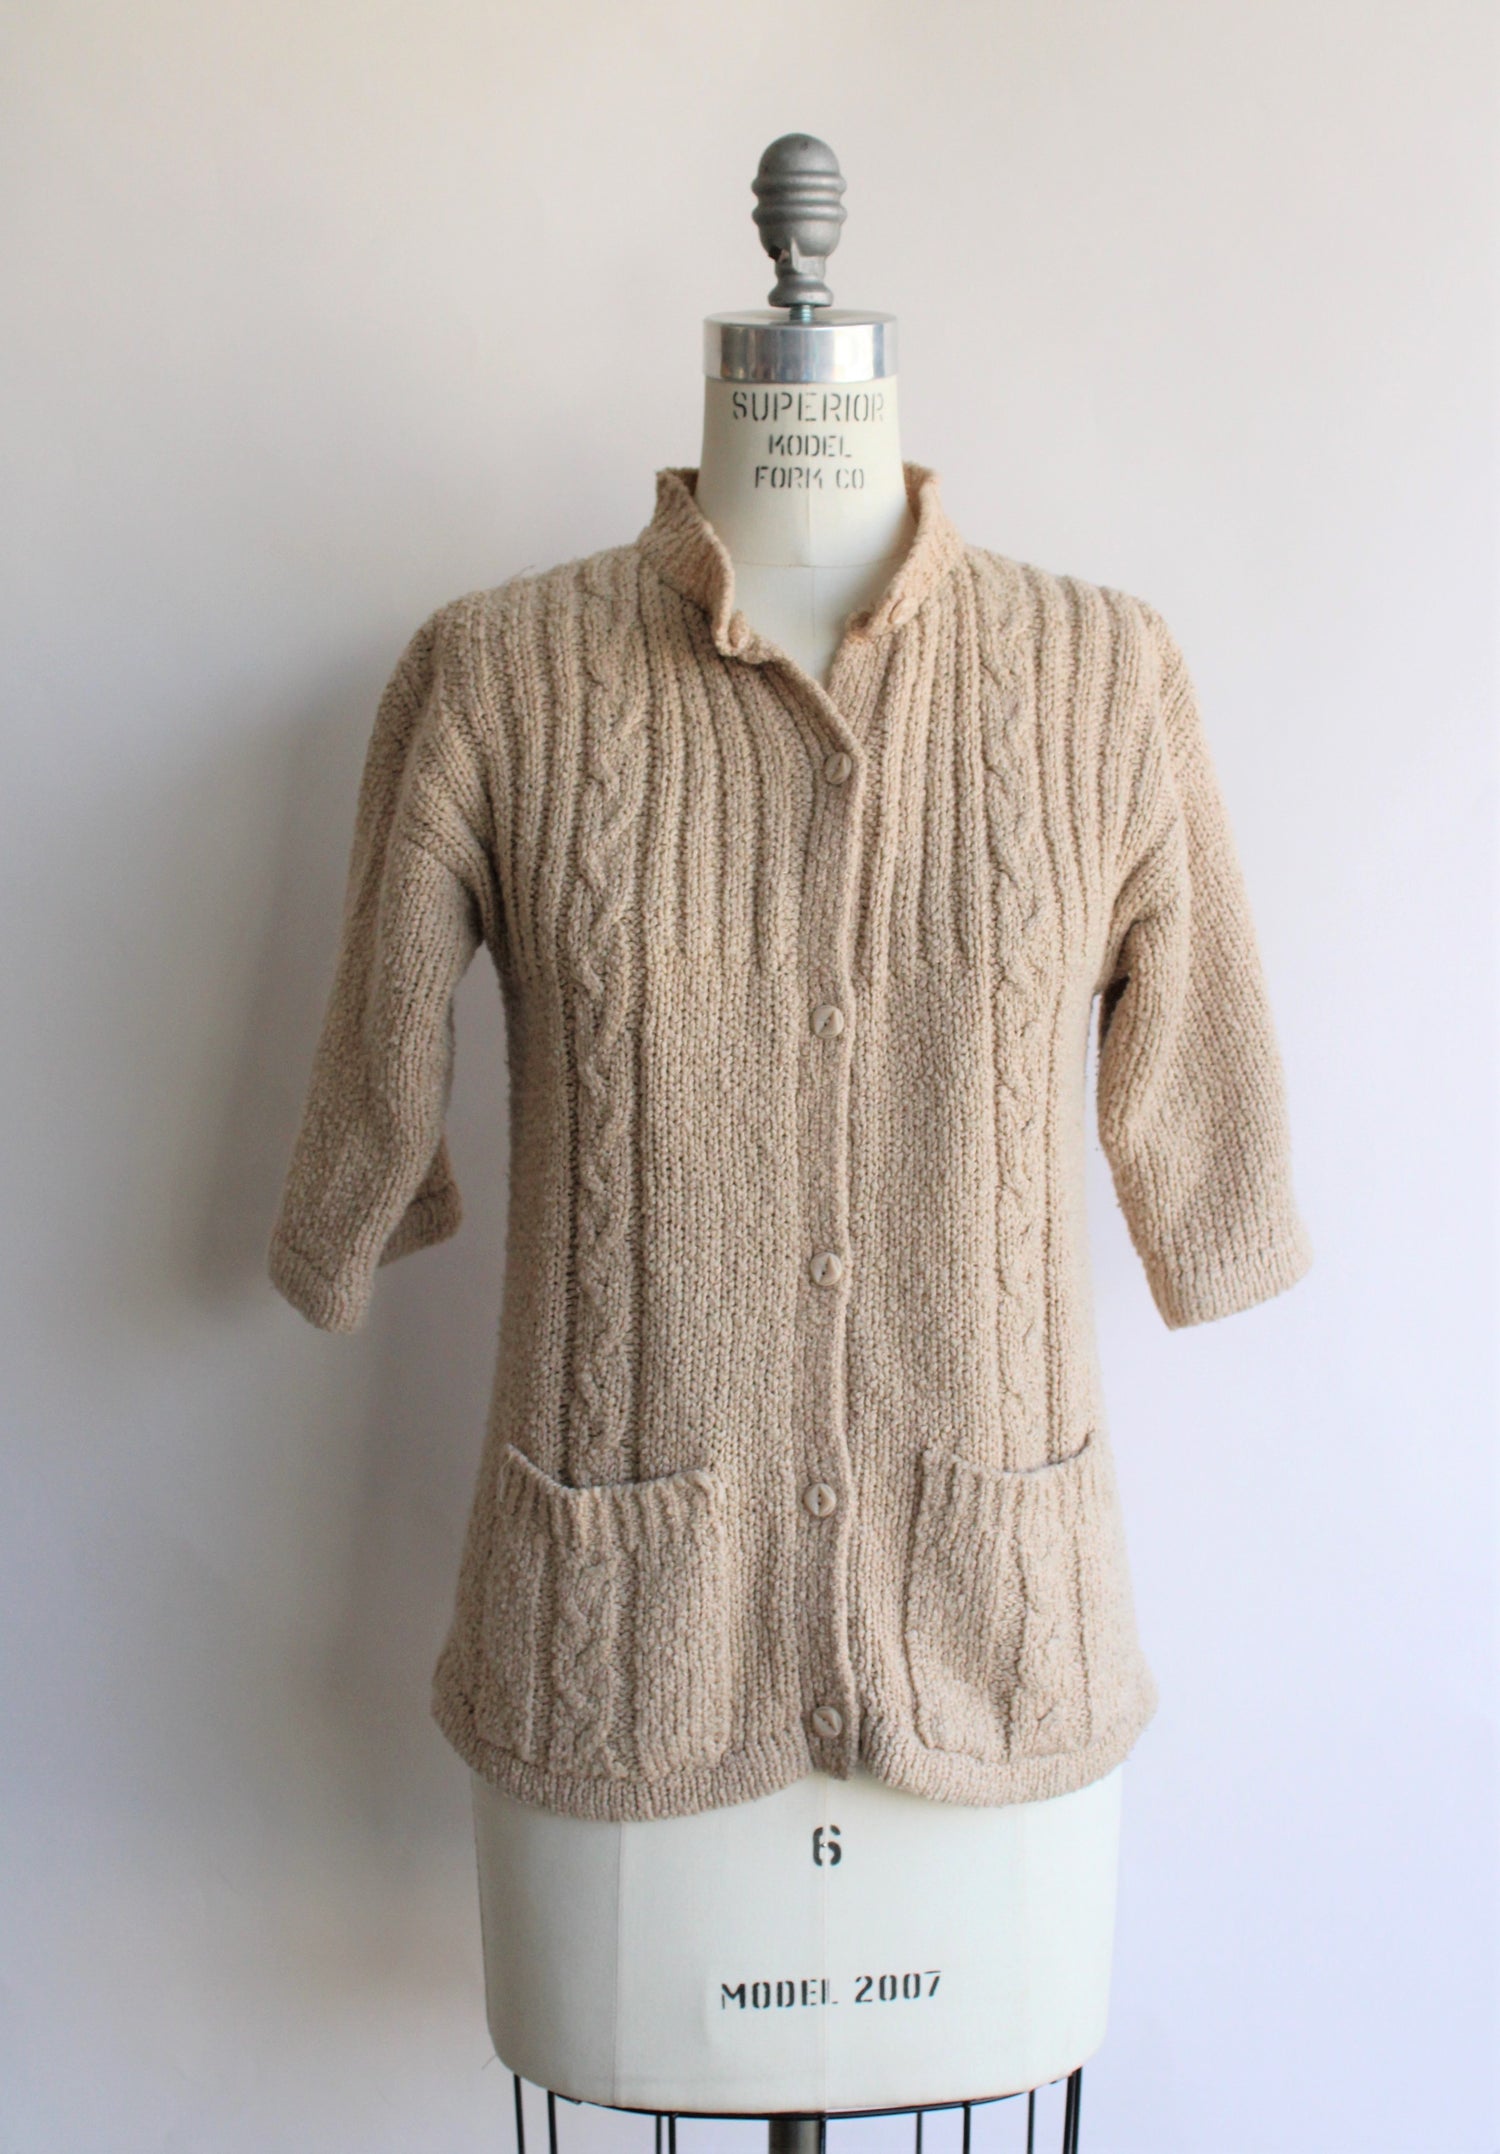 Vintage 1970s LeRoy Knitwear Tan Cable Knit Cardigan